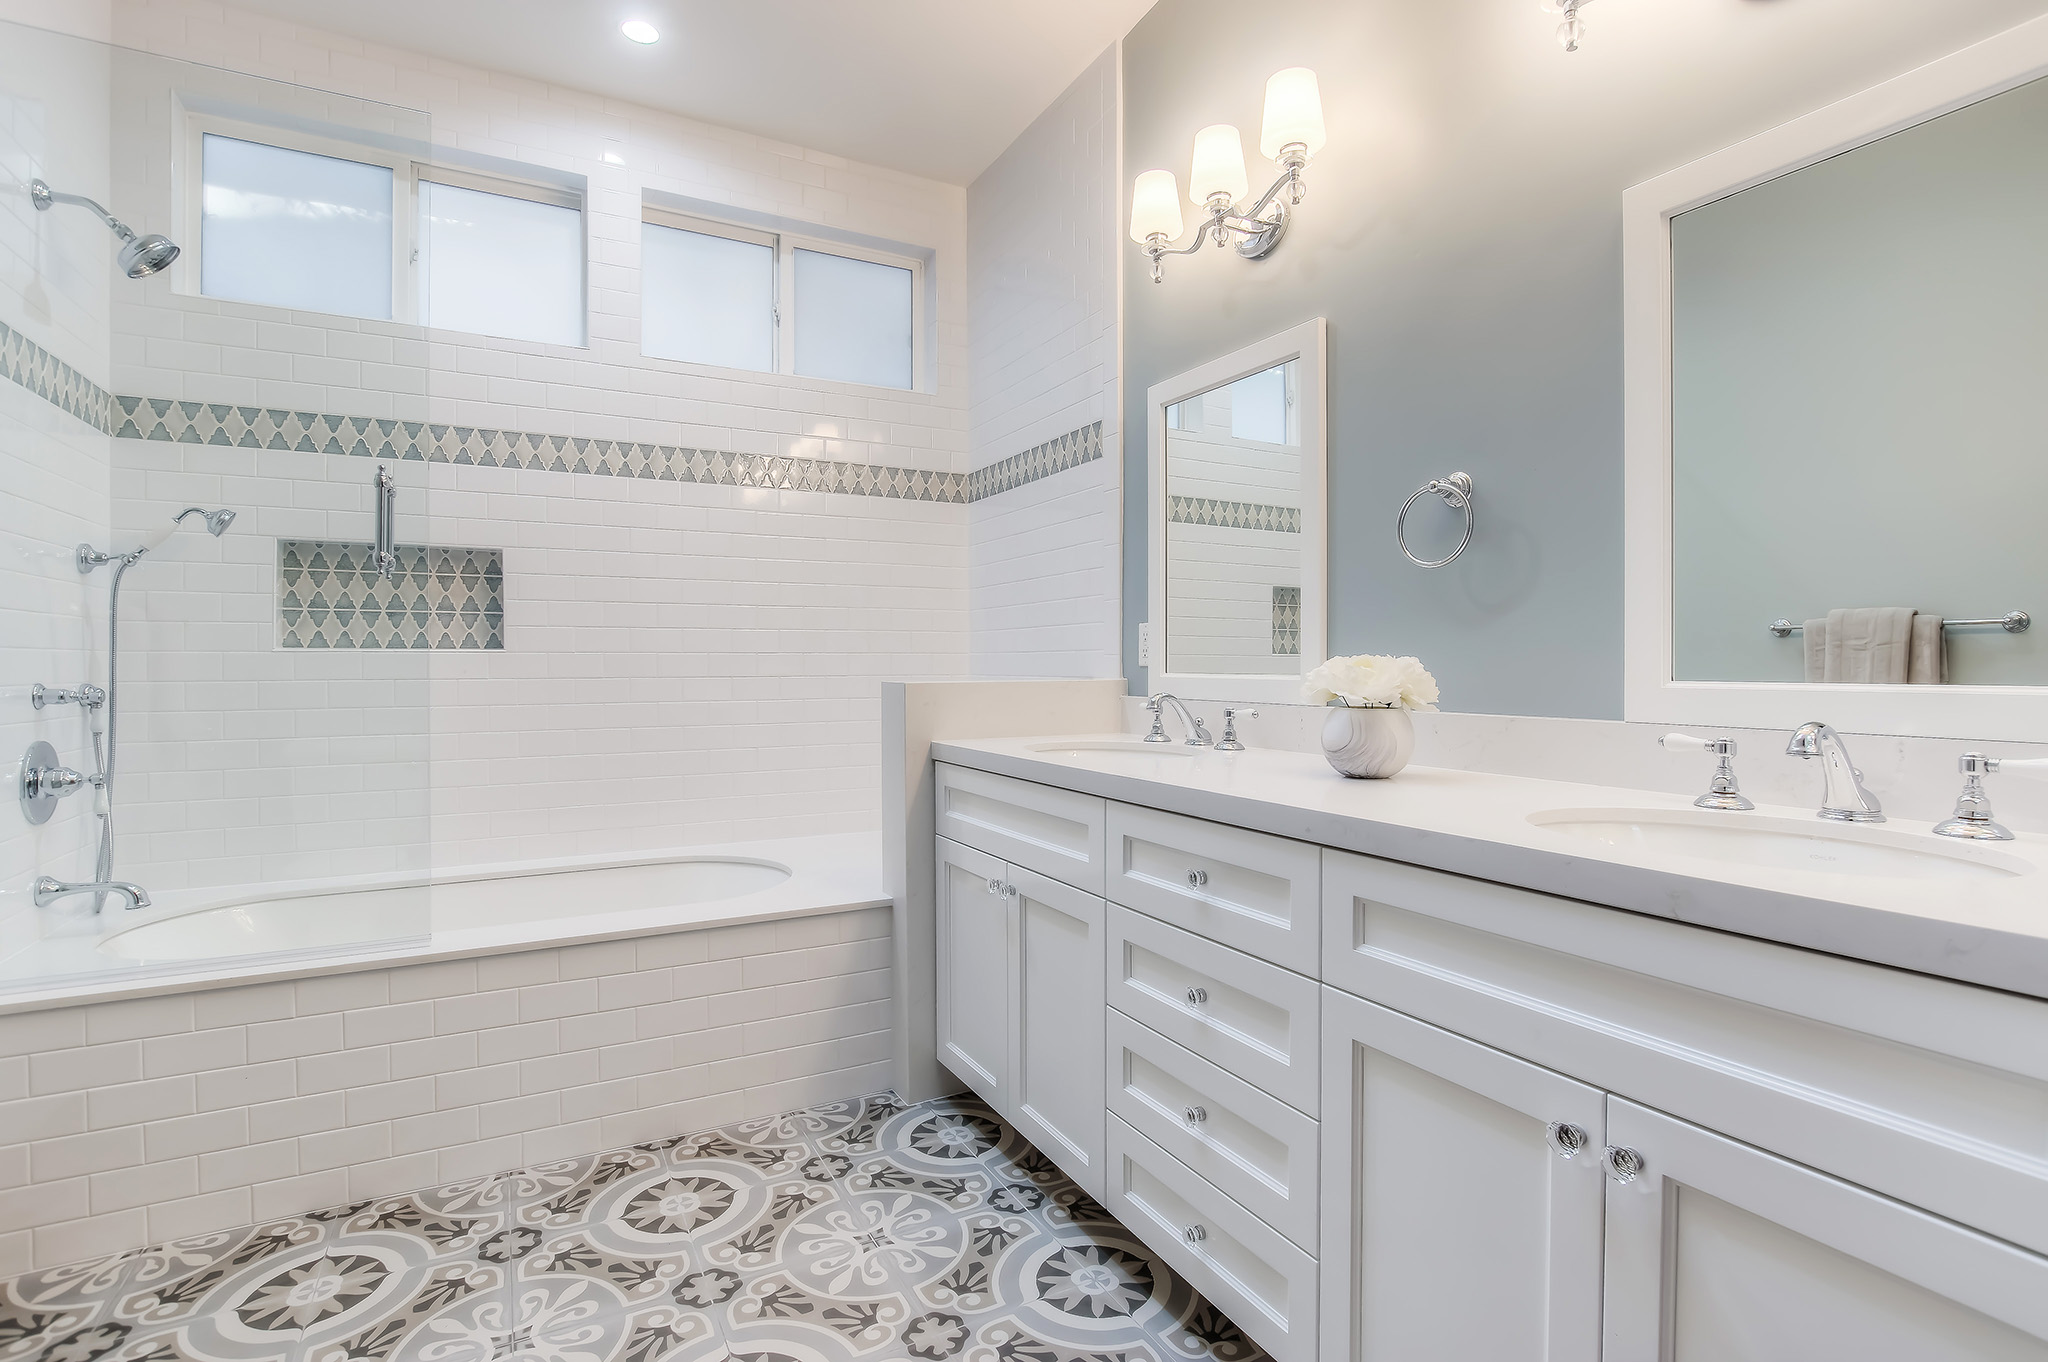 Alma Project: Bathroom Remodel, Centsational Style